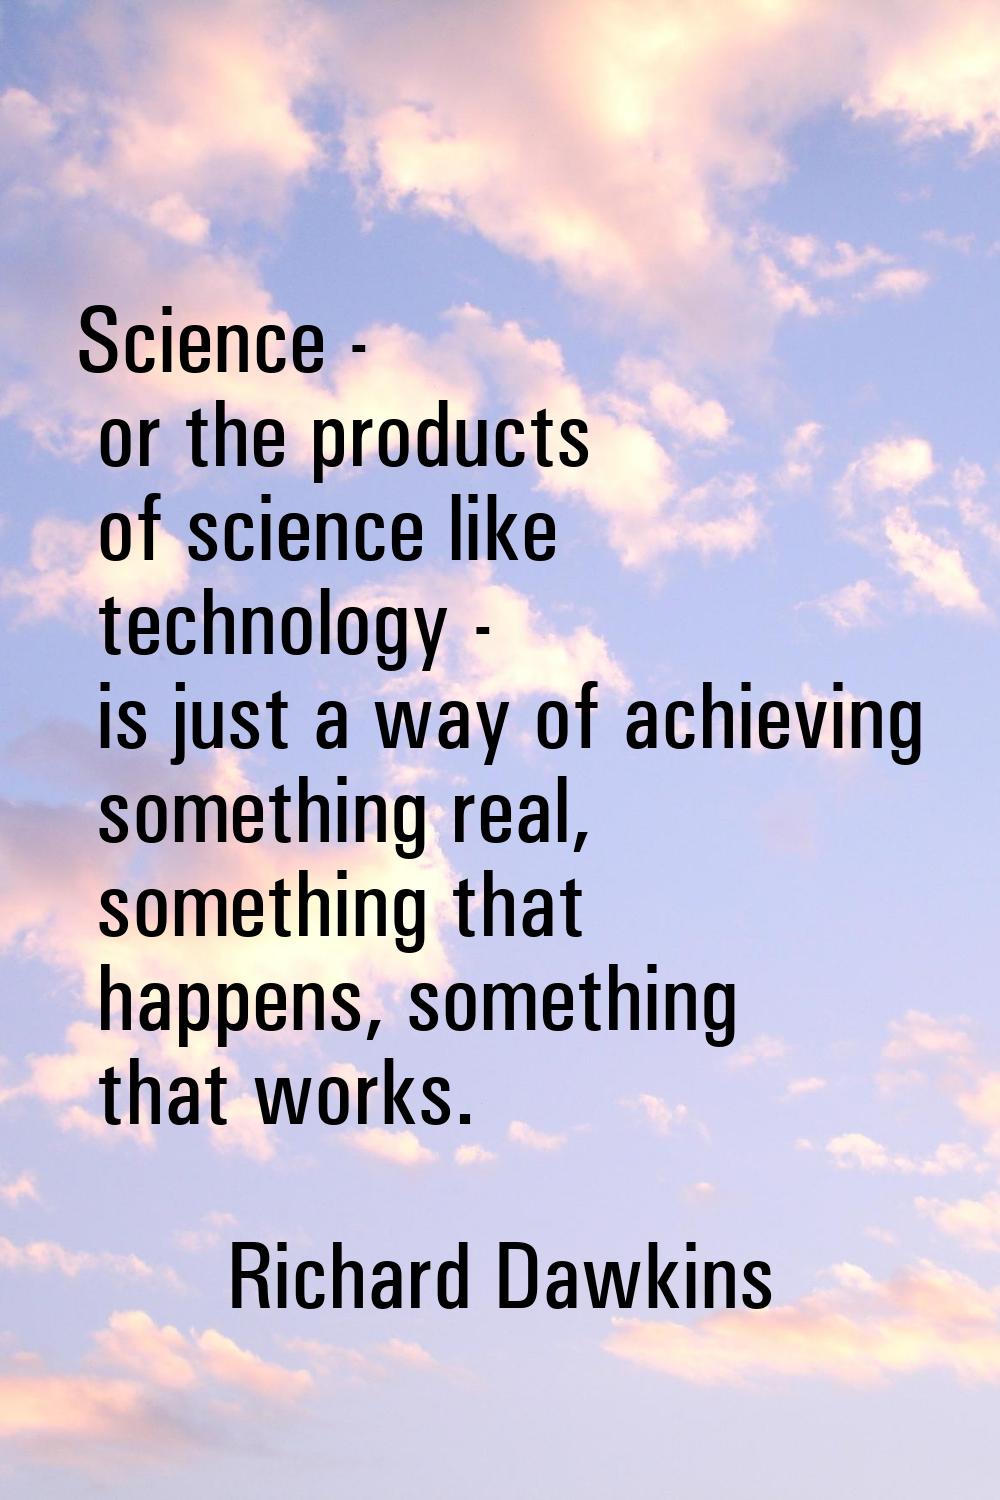 Science - or the products of science like technology - is just a way of achieving something real, s